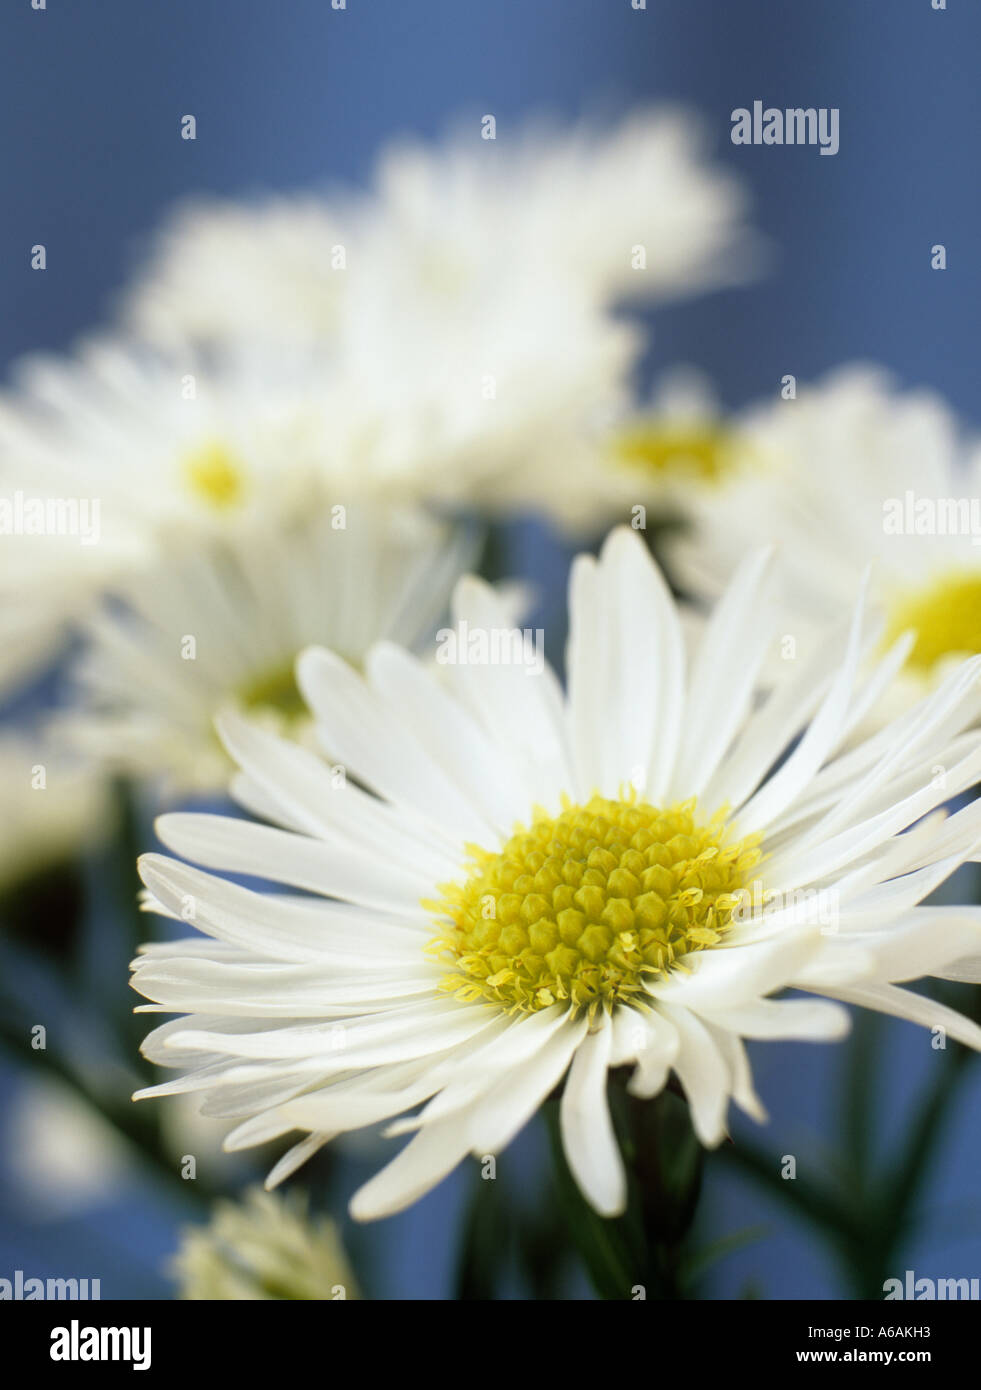 White Michaelmas Daisies 'Aster novi belgii'  focused on foreground flower in close up against a blue background Stock Photo